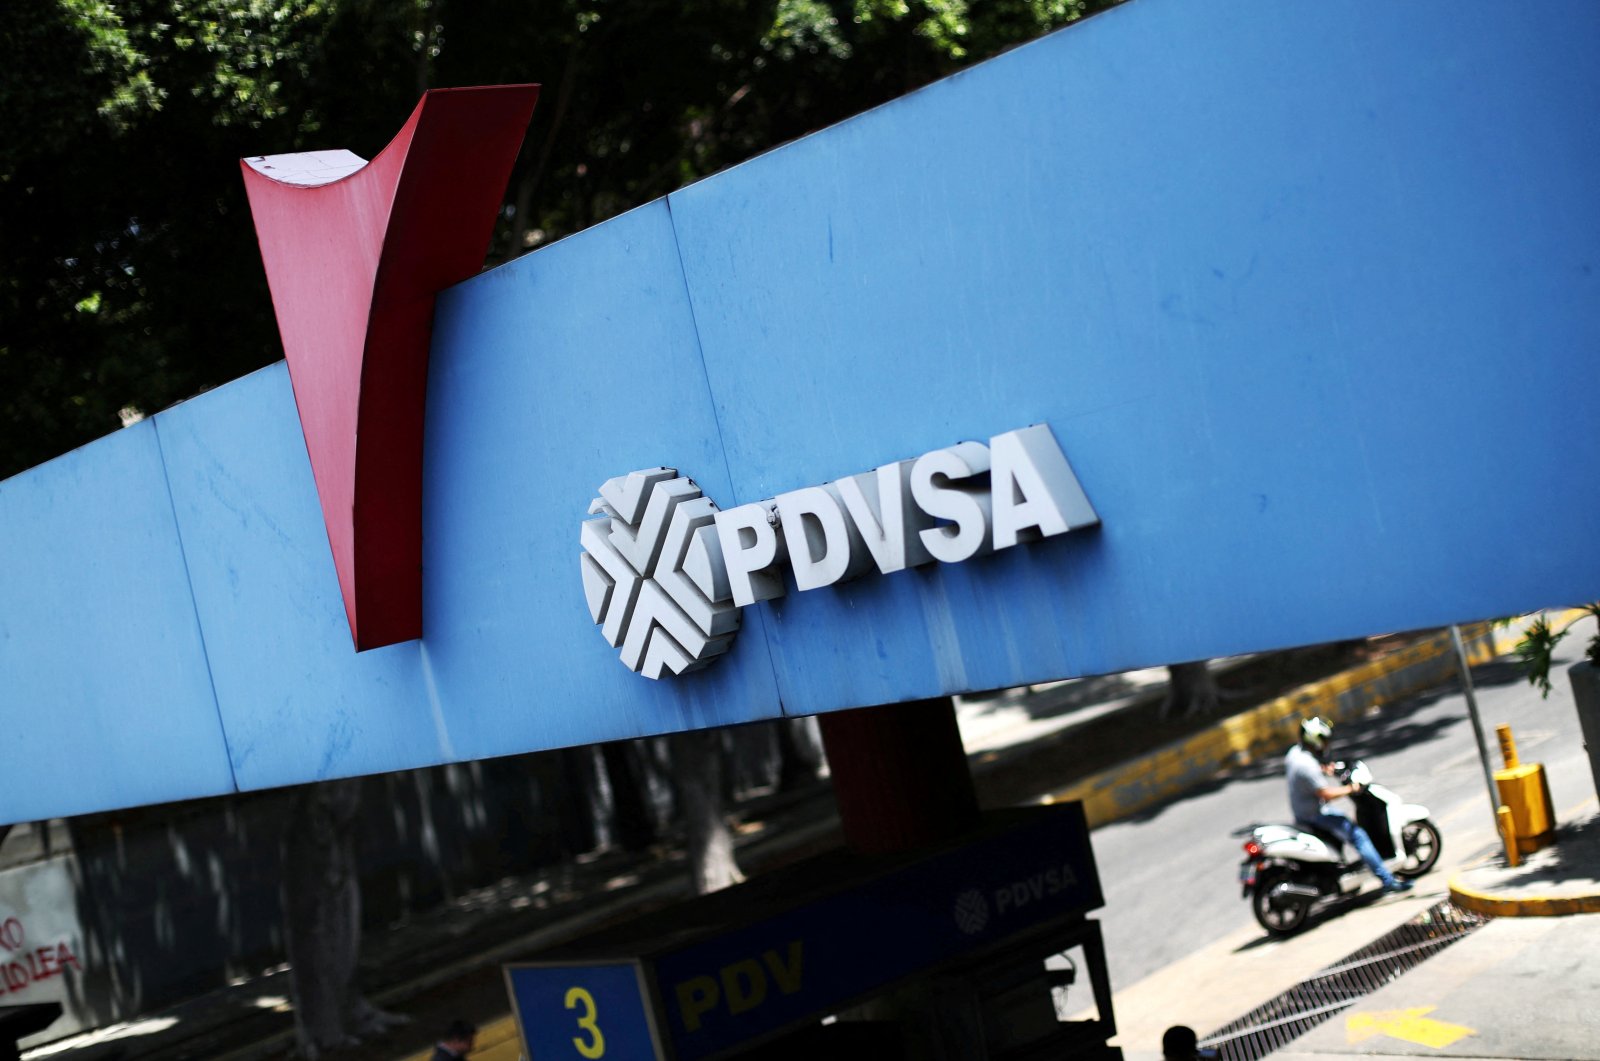 A state oil company PDVSA&#039;s logo is seen at a gas station in Caracas, Venezuela, May 17, 2019. (Reuters Photo)